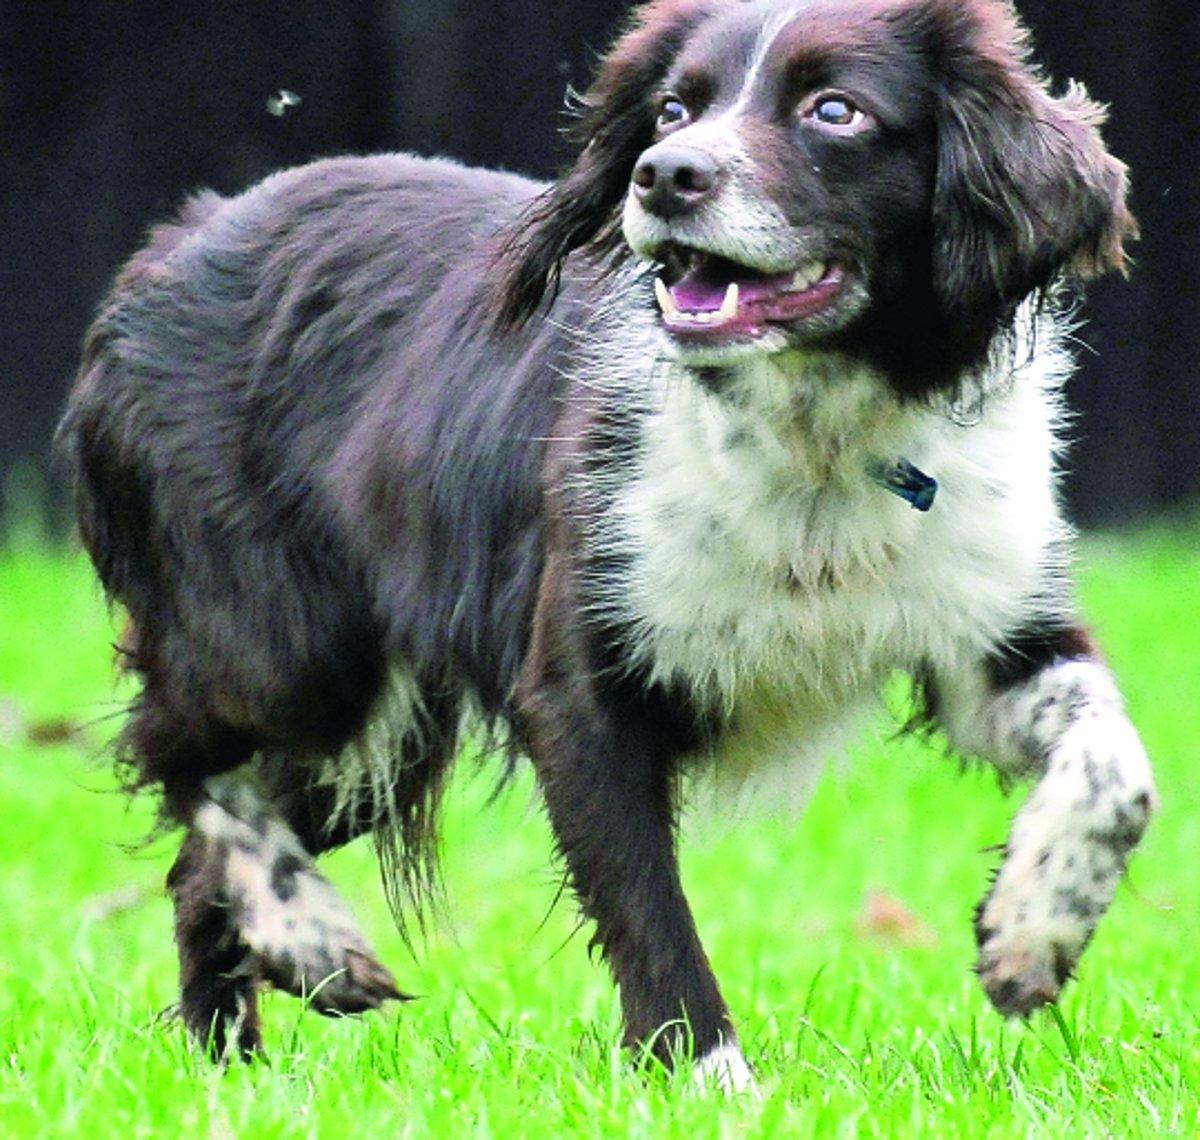 Can you give a dog a new life?
“Sophie is an eight-year-old English springer spaniel. She was found as a stray. She adores going for long countryside ambles and would love to find someone who shares her passion for the great outdoors. Sophie may need s